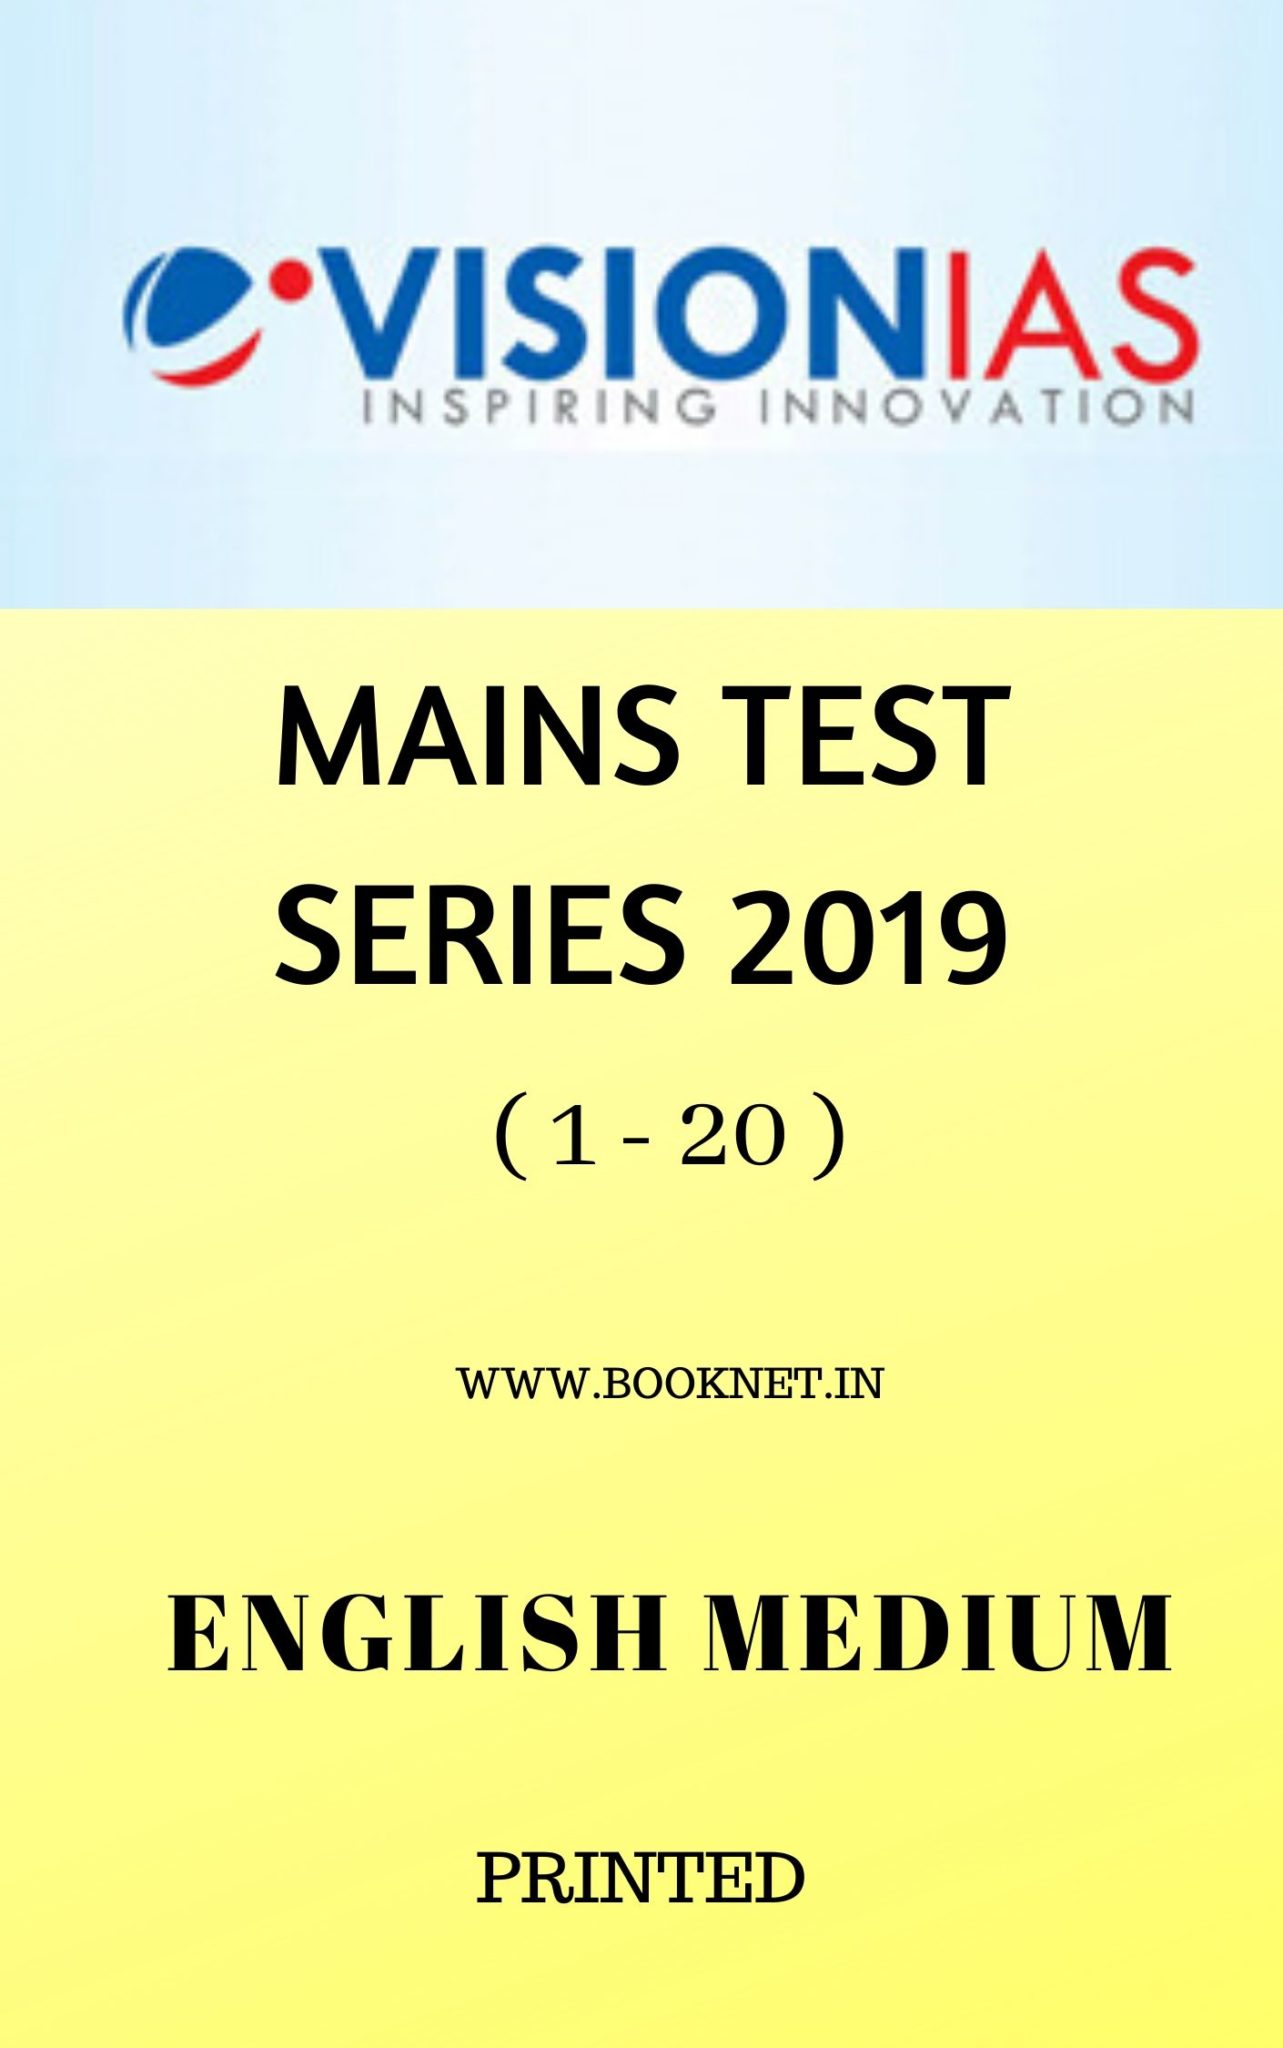 Mains Test Series By Vision Ias (120)